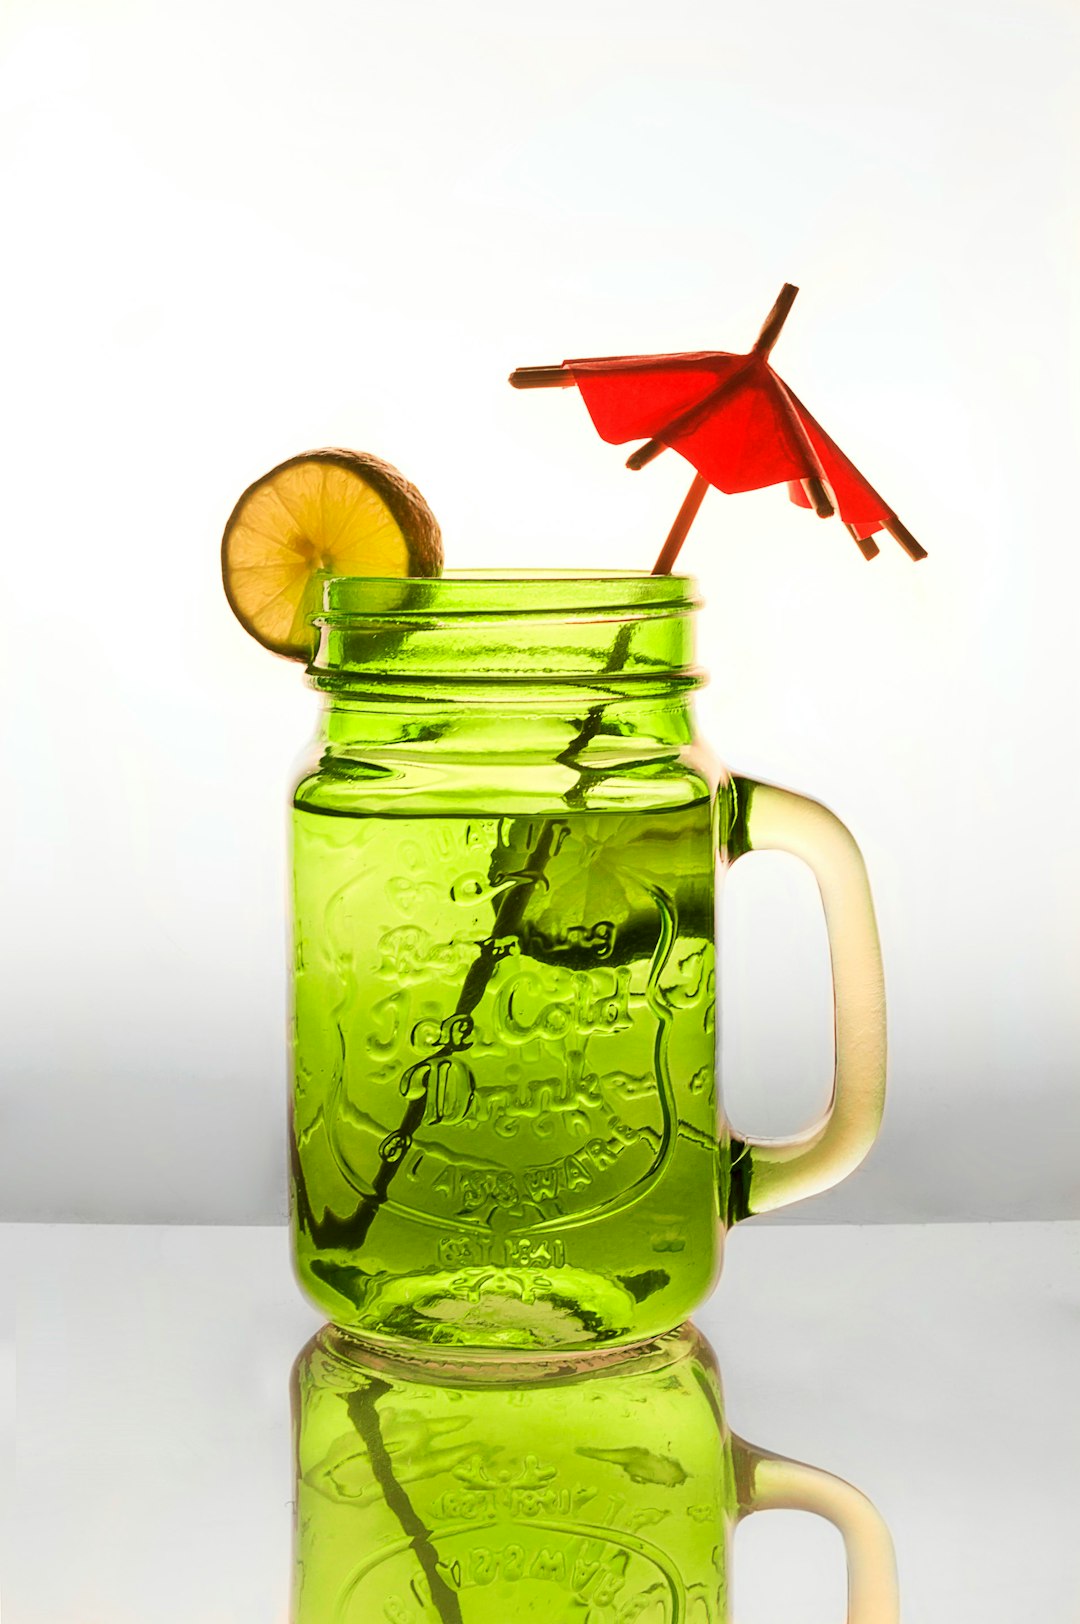 water in clear glass jar with sliced lemon and red umbrella stick